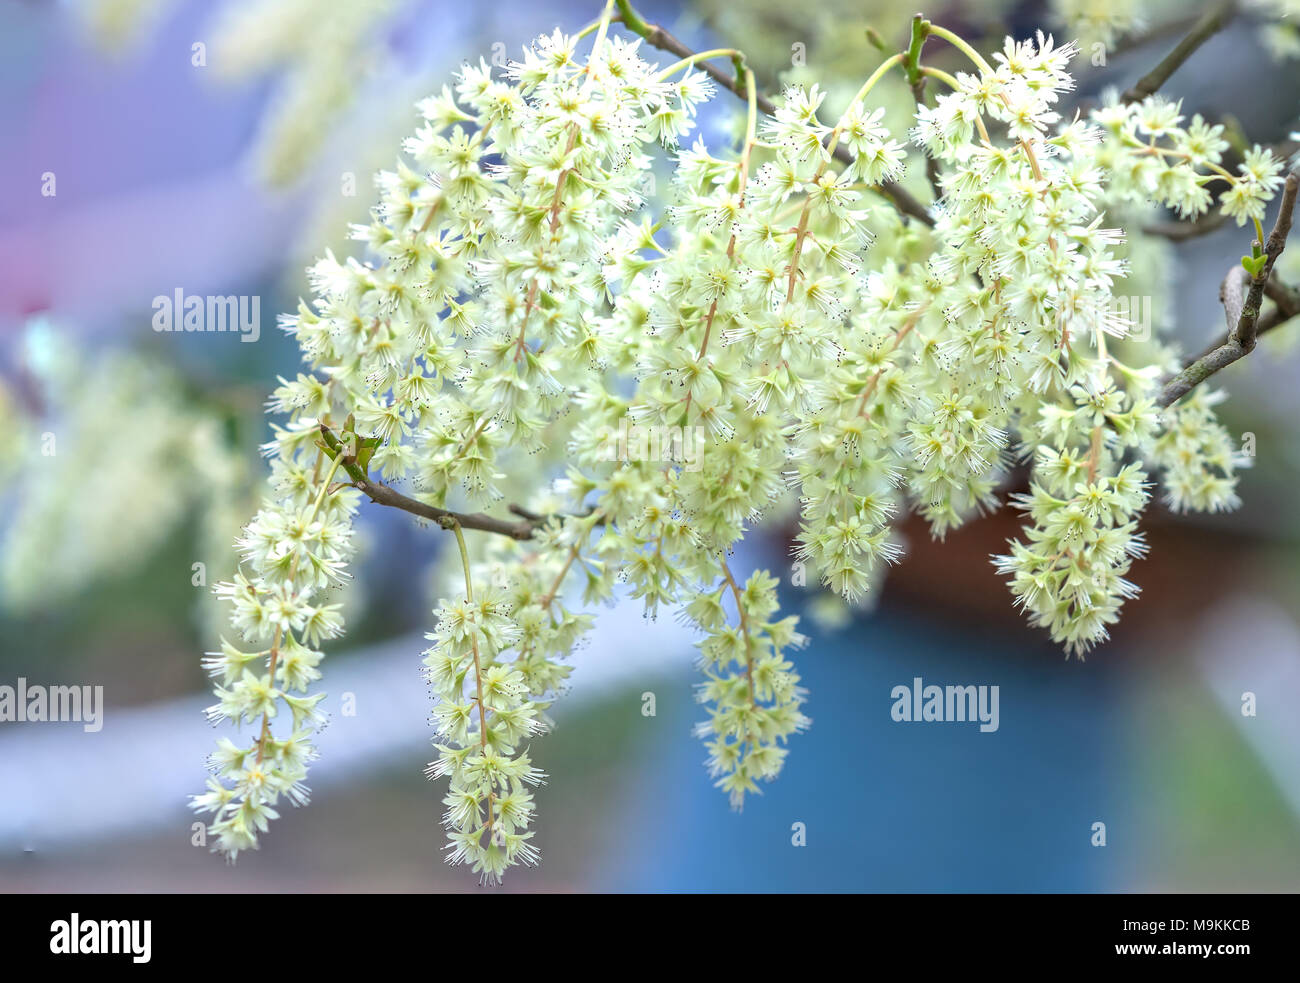 Homalium flowers blossom in the spring sunshine with fragile but attractive body in nature. Stock Photo